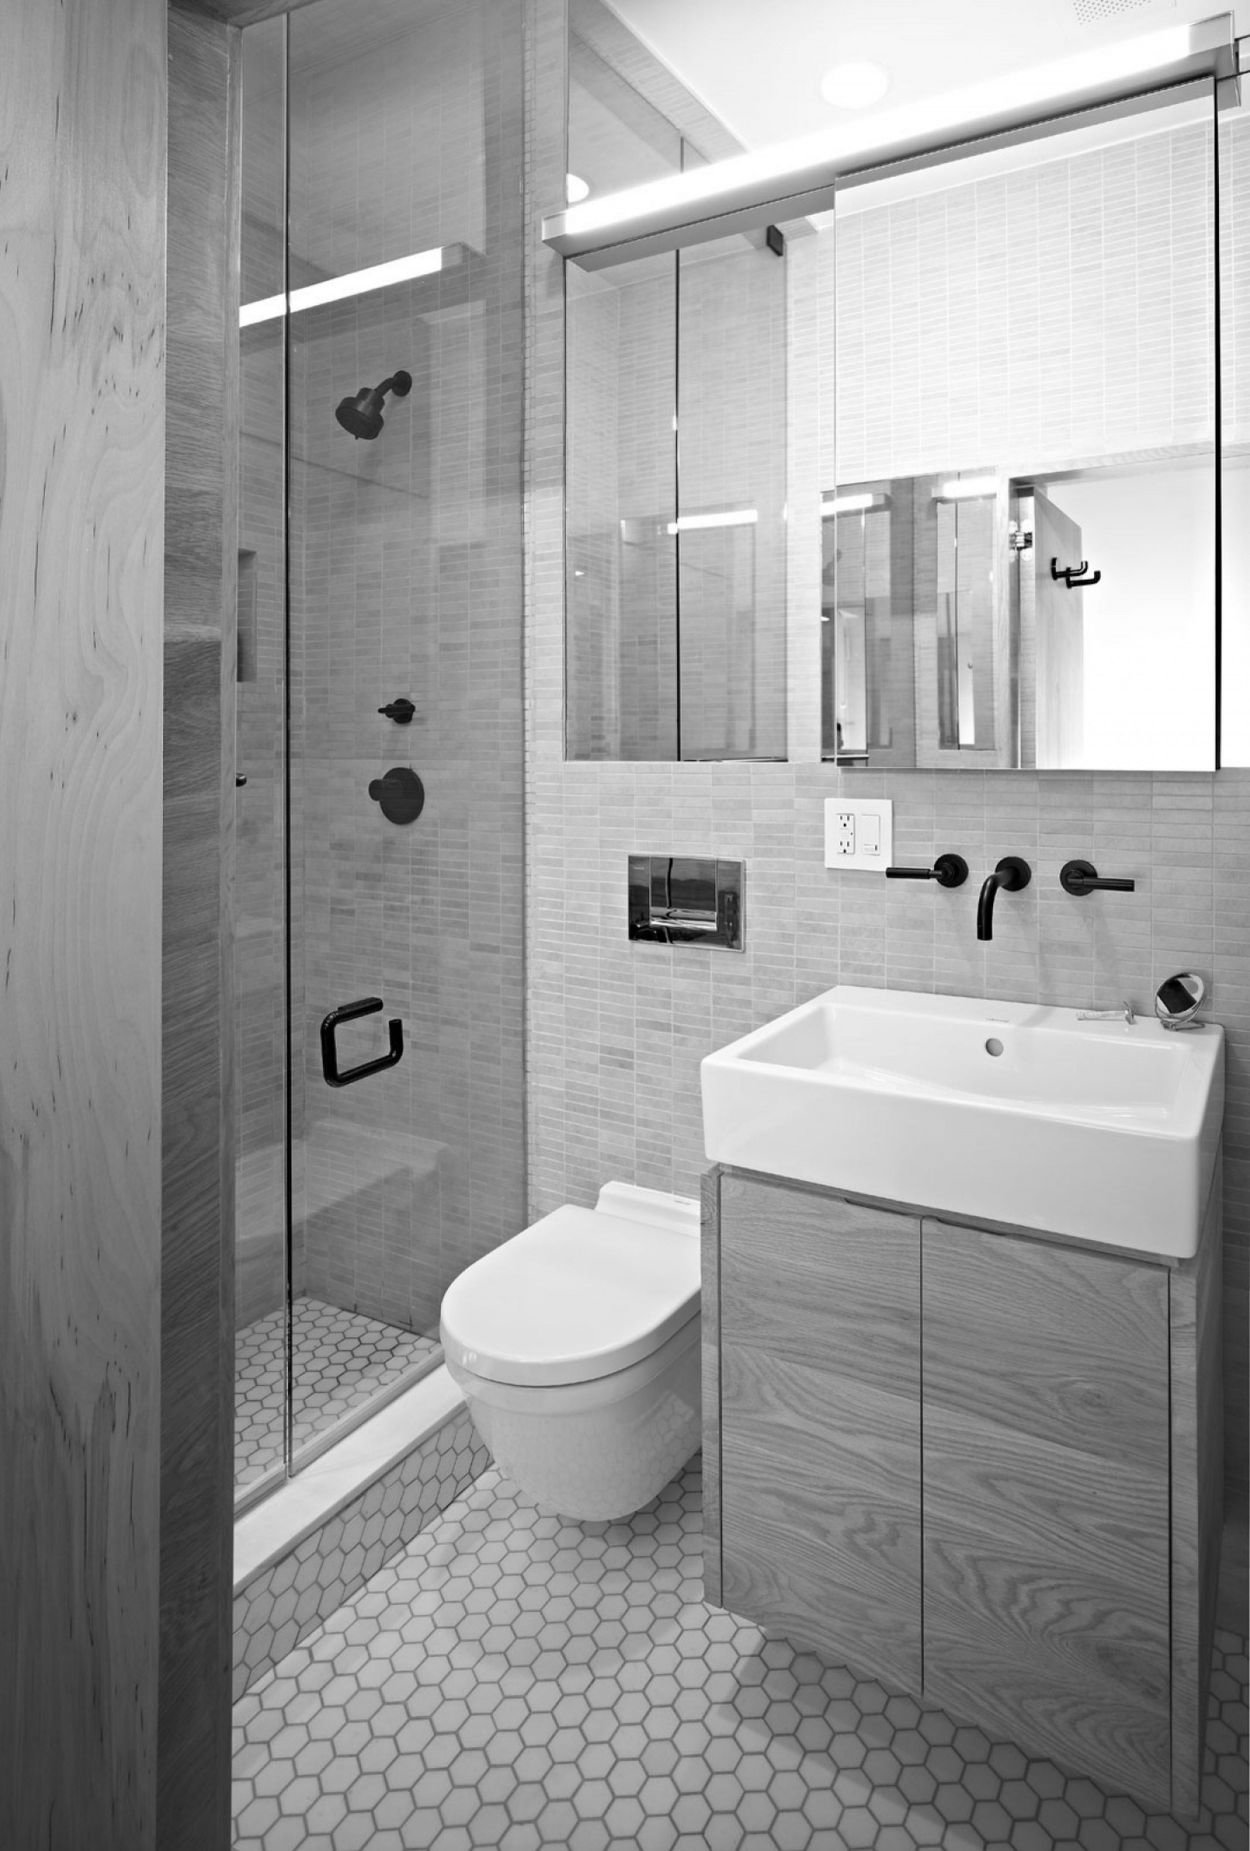 10 Stylish Bathroom Ideas For Small Spaces inspiring innovative modern bathroom ideas for small spaces on 2022